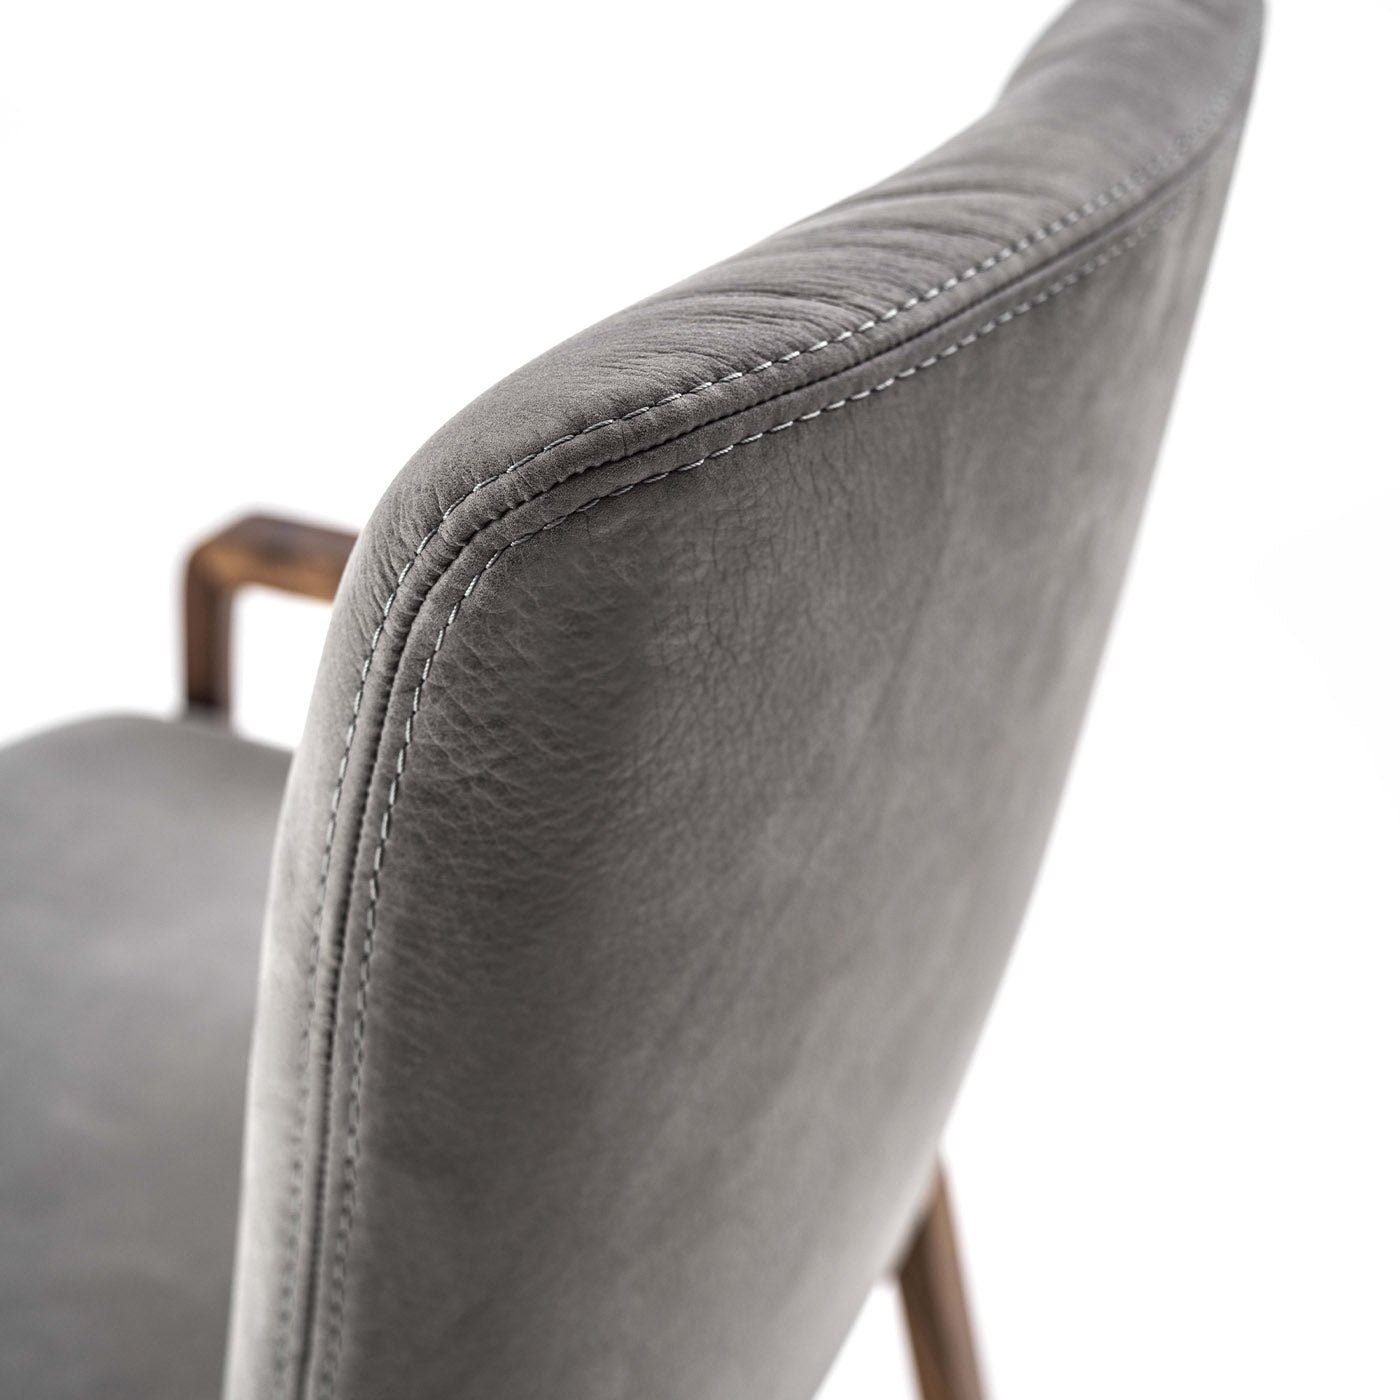 Noblé Gray Chair With Arms by Giuliano & Gabriele Cappelletti - Alternative view 3